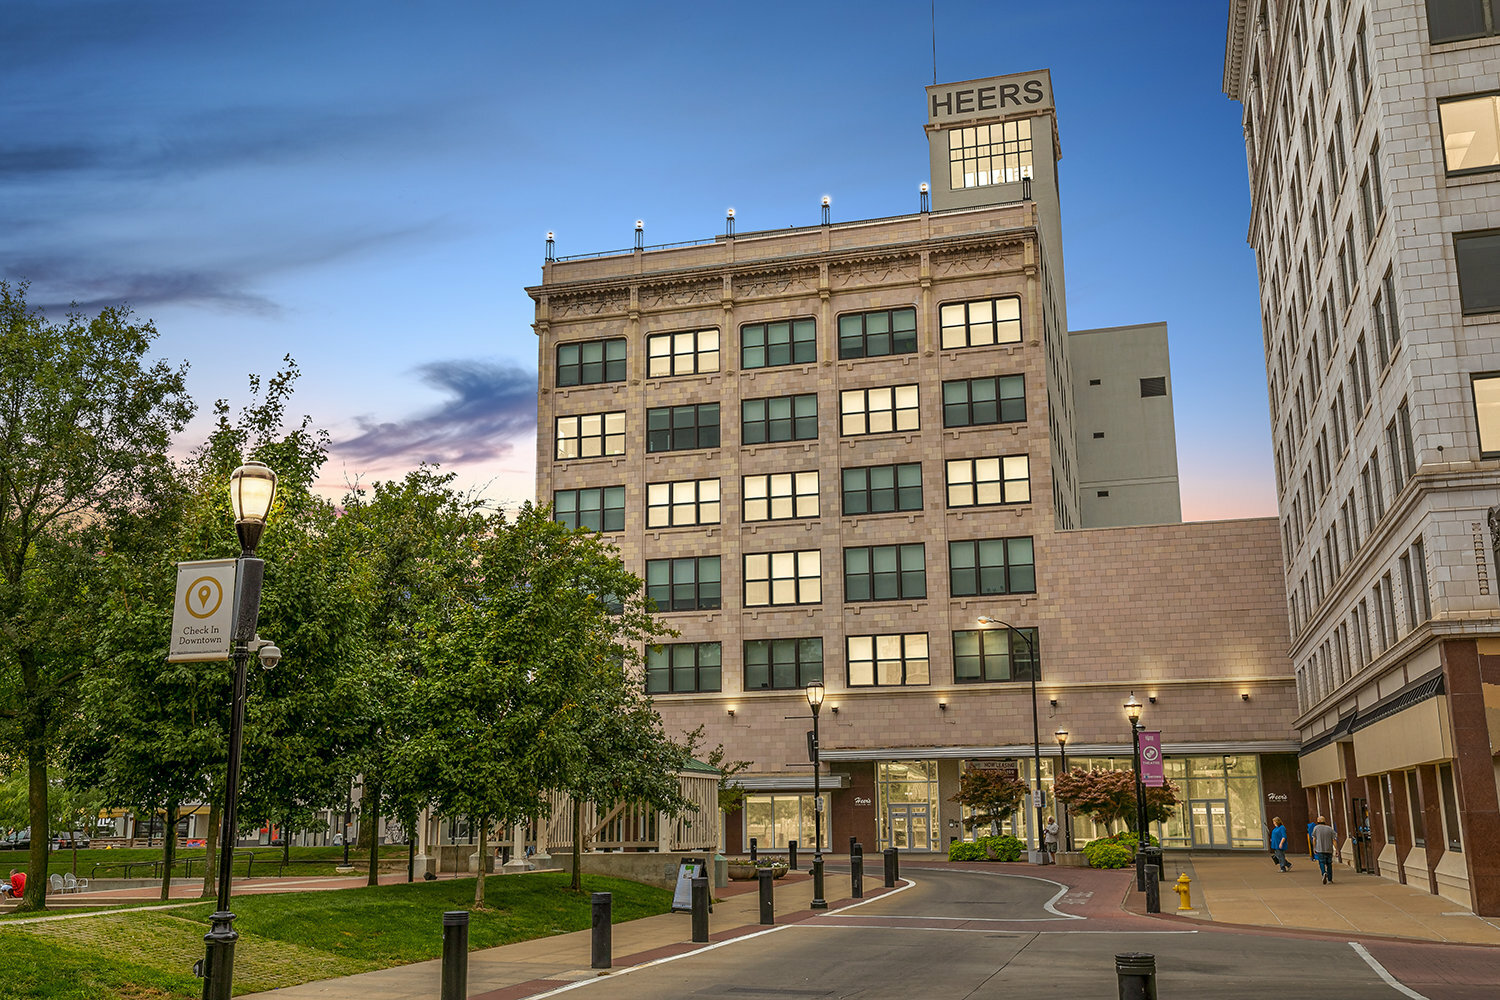 Meridian Title occupies nearly 10,000 square feet in the Heer’s building, 138 Park Central Square, Ste. 102.